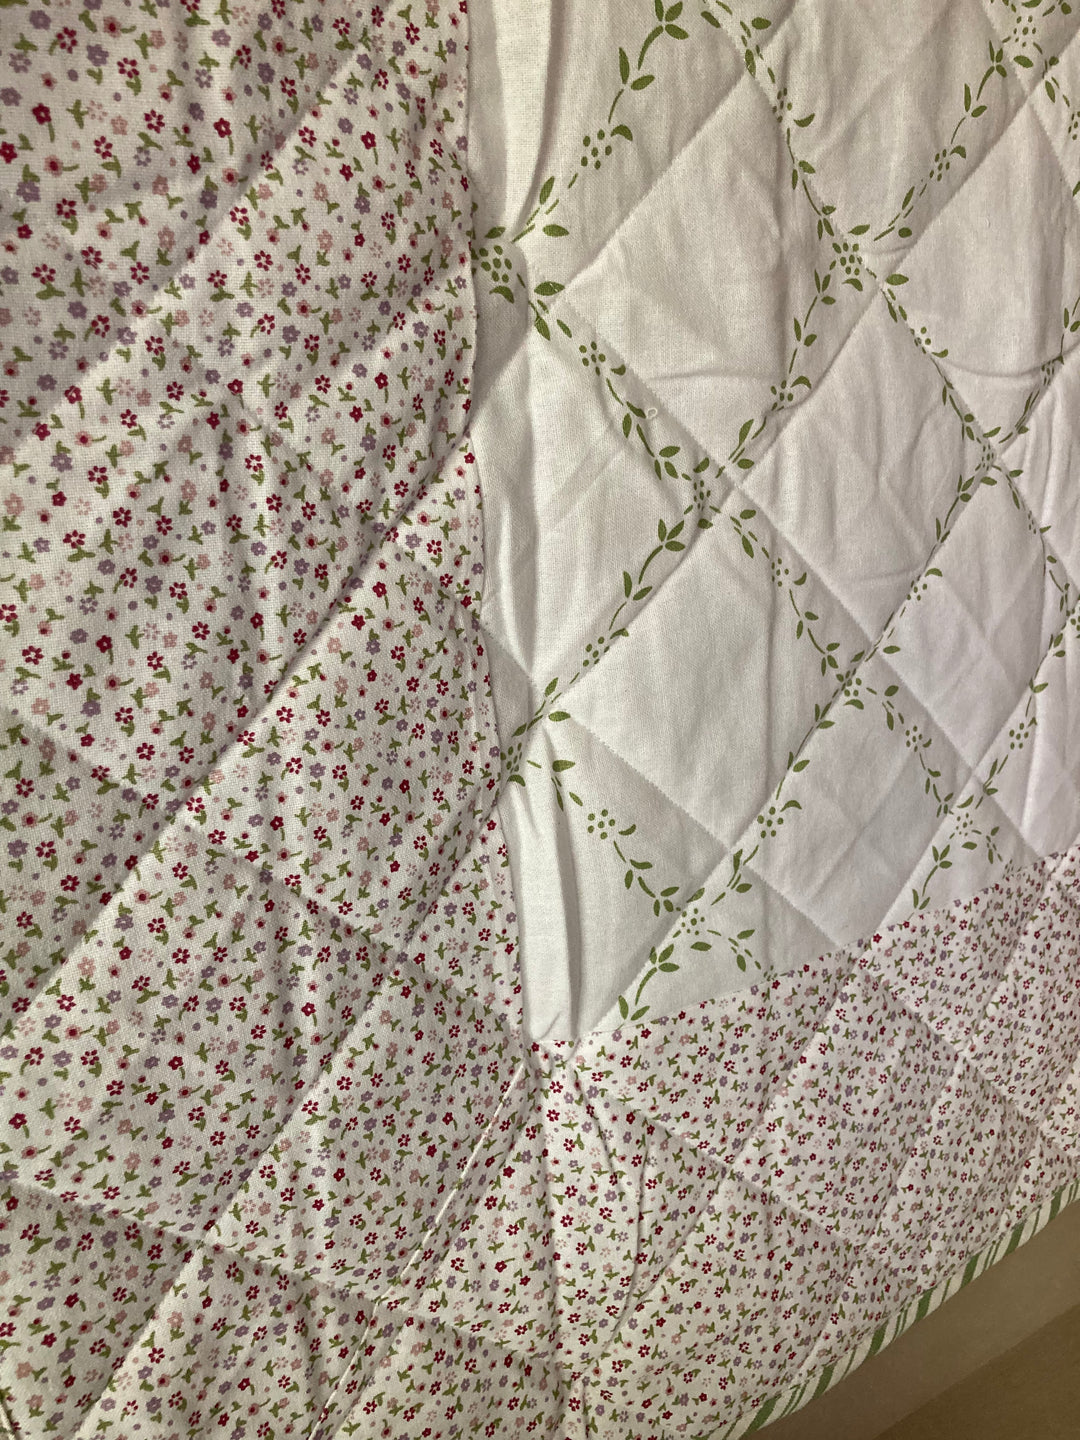 Danishville green and pink quilt